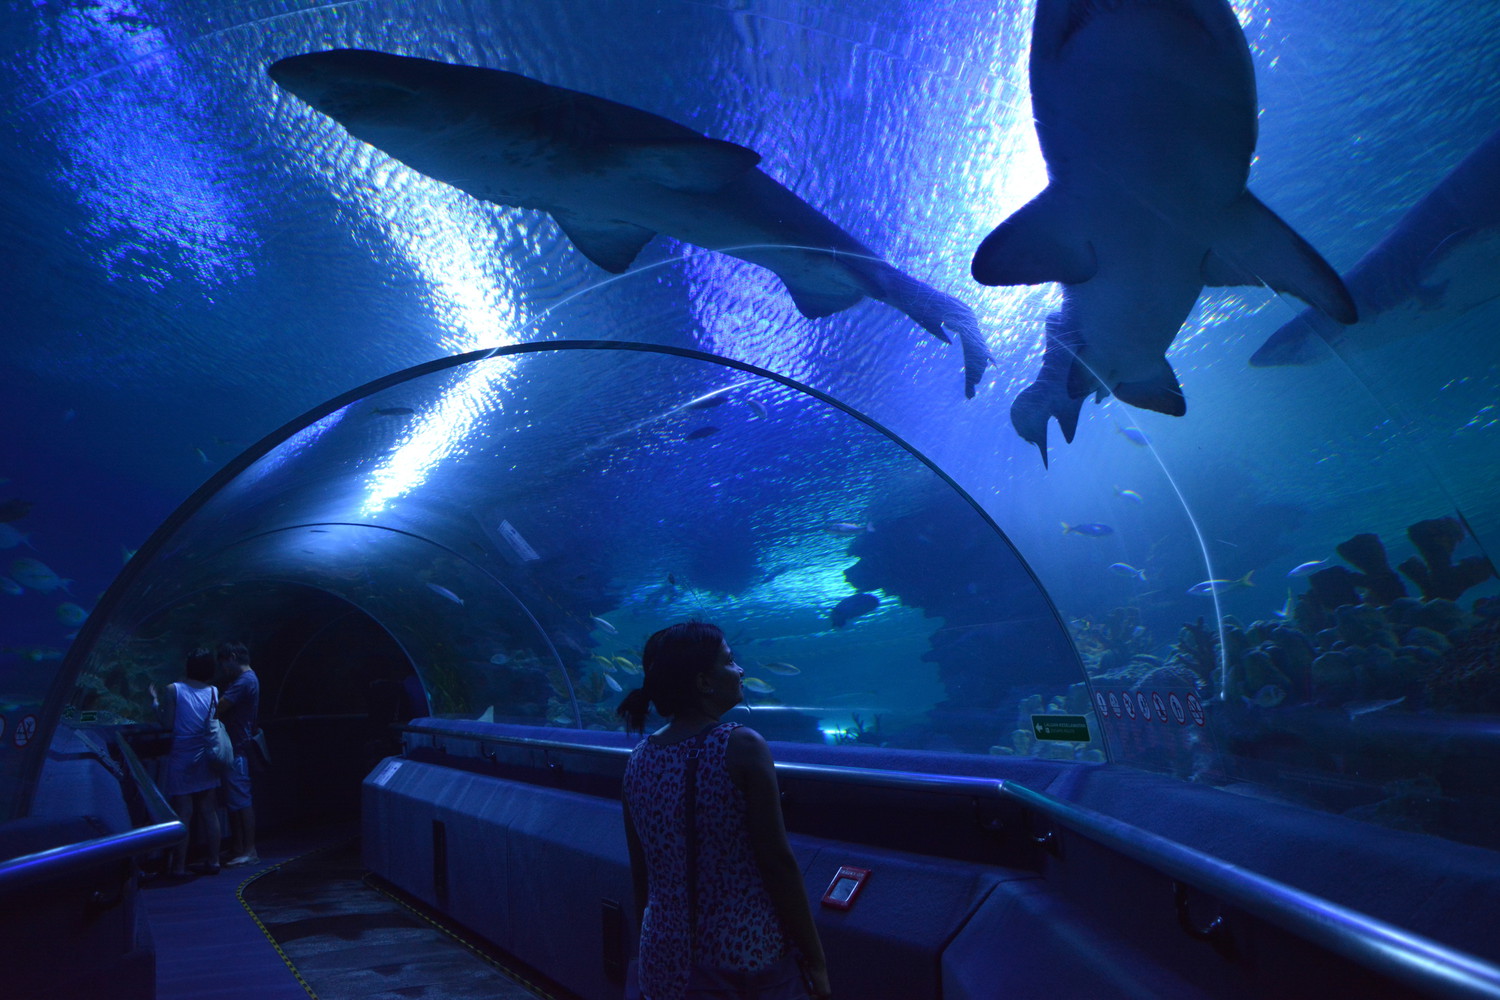 Sharks and fish in an overhead water tunnel